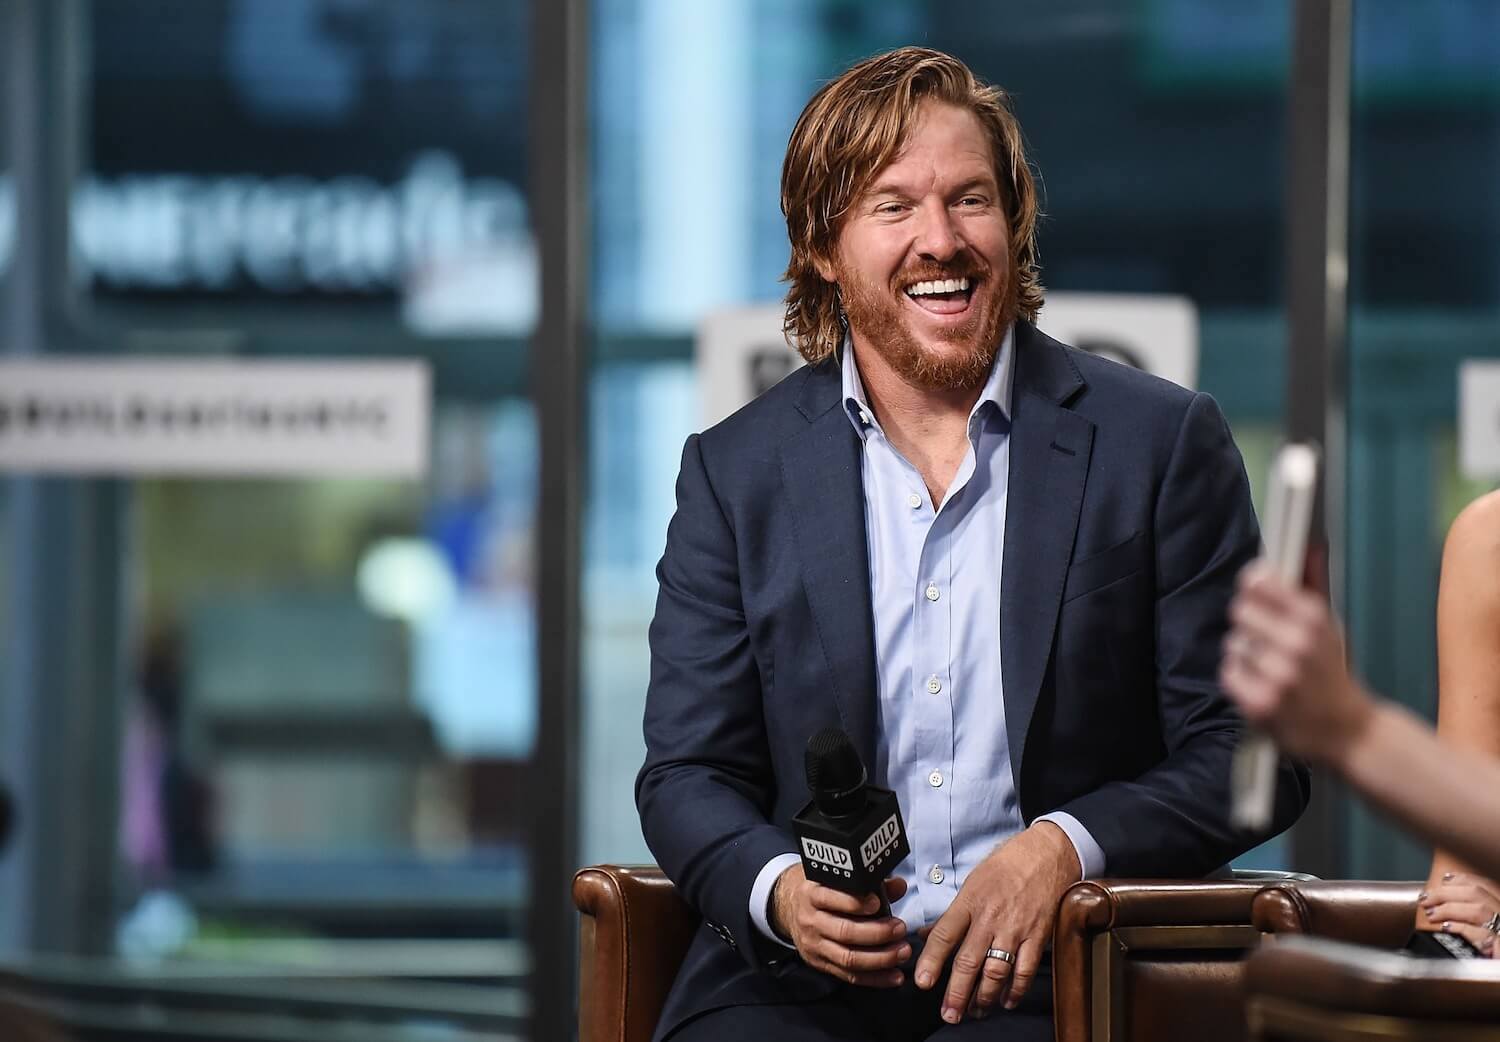 Chip Gaines from 'Fixer Upper' smiling during an interview